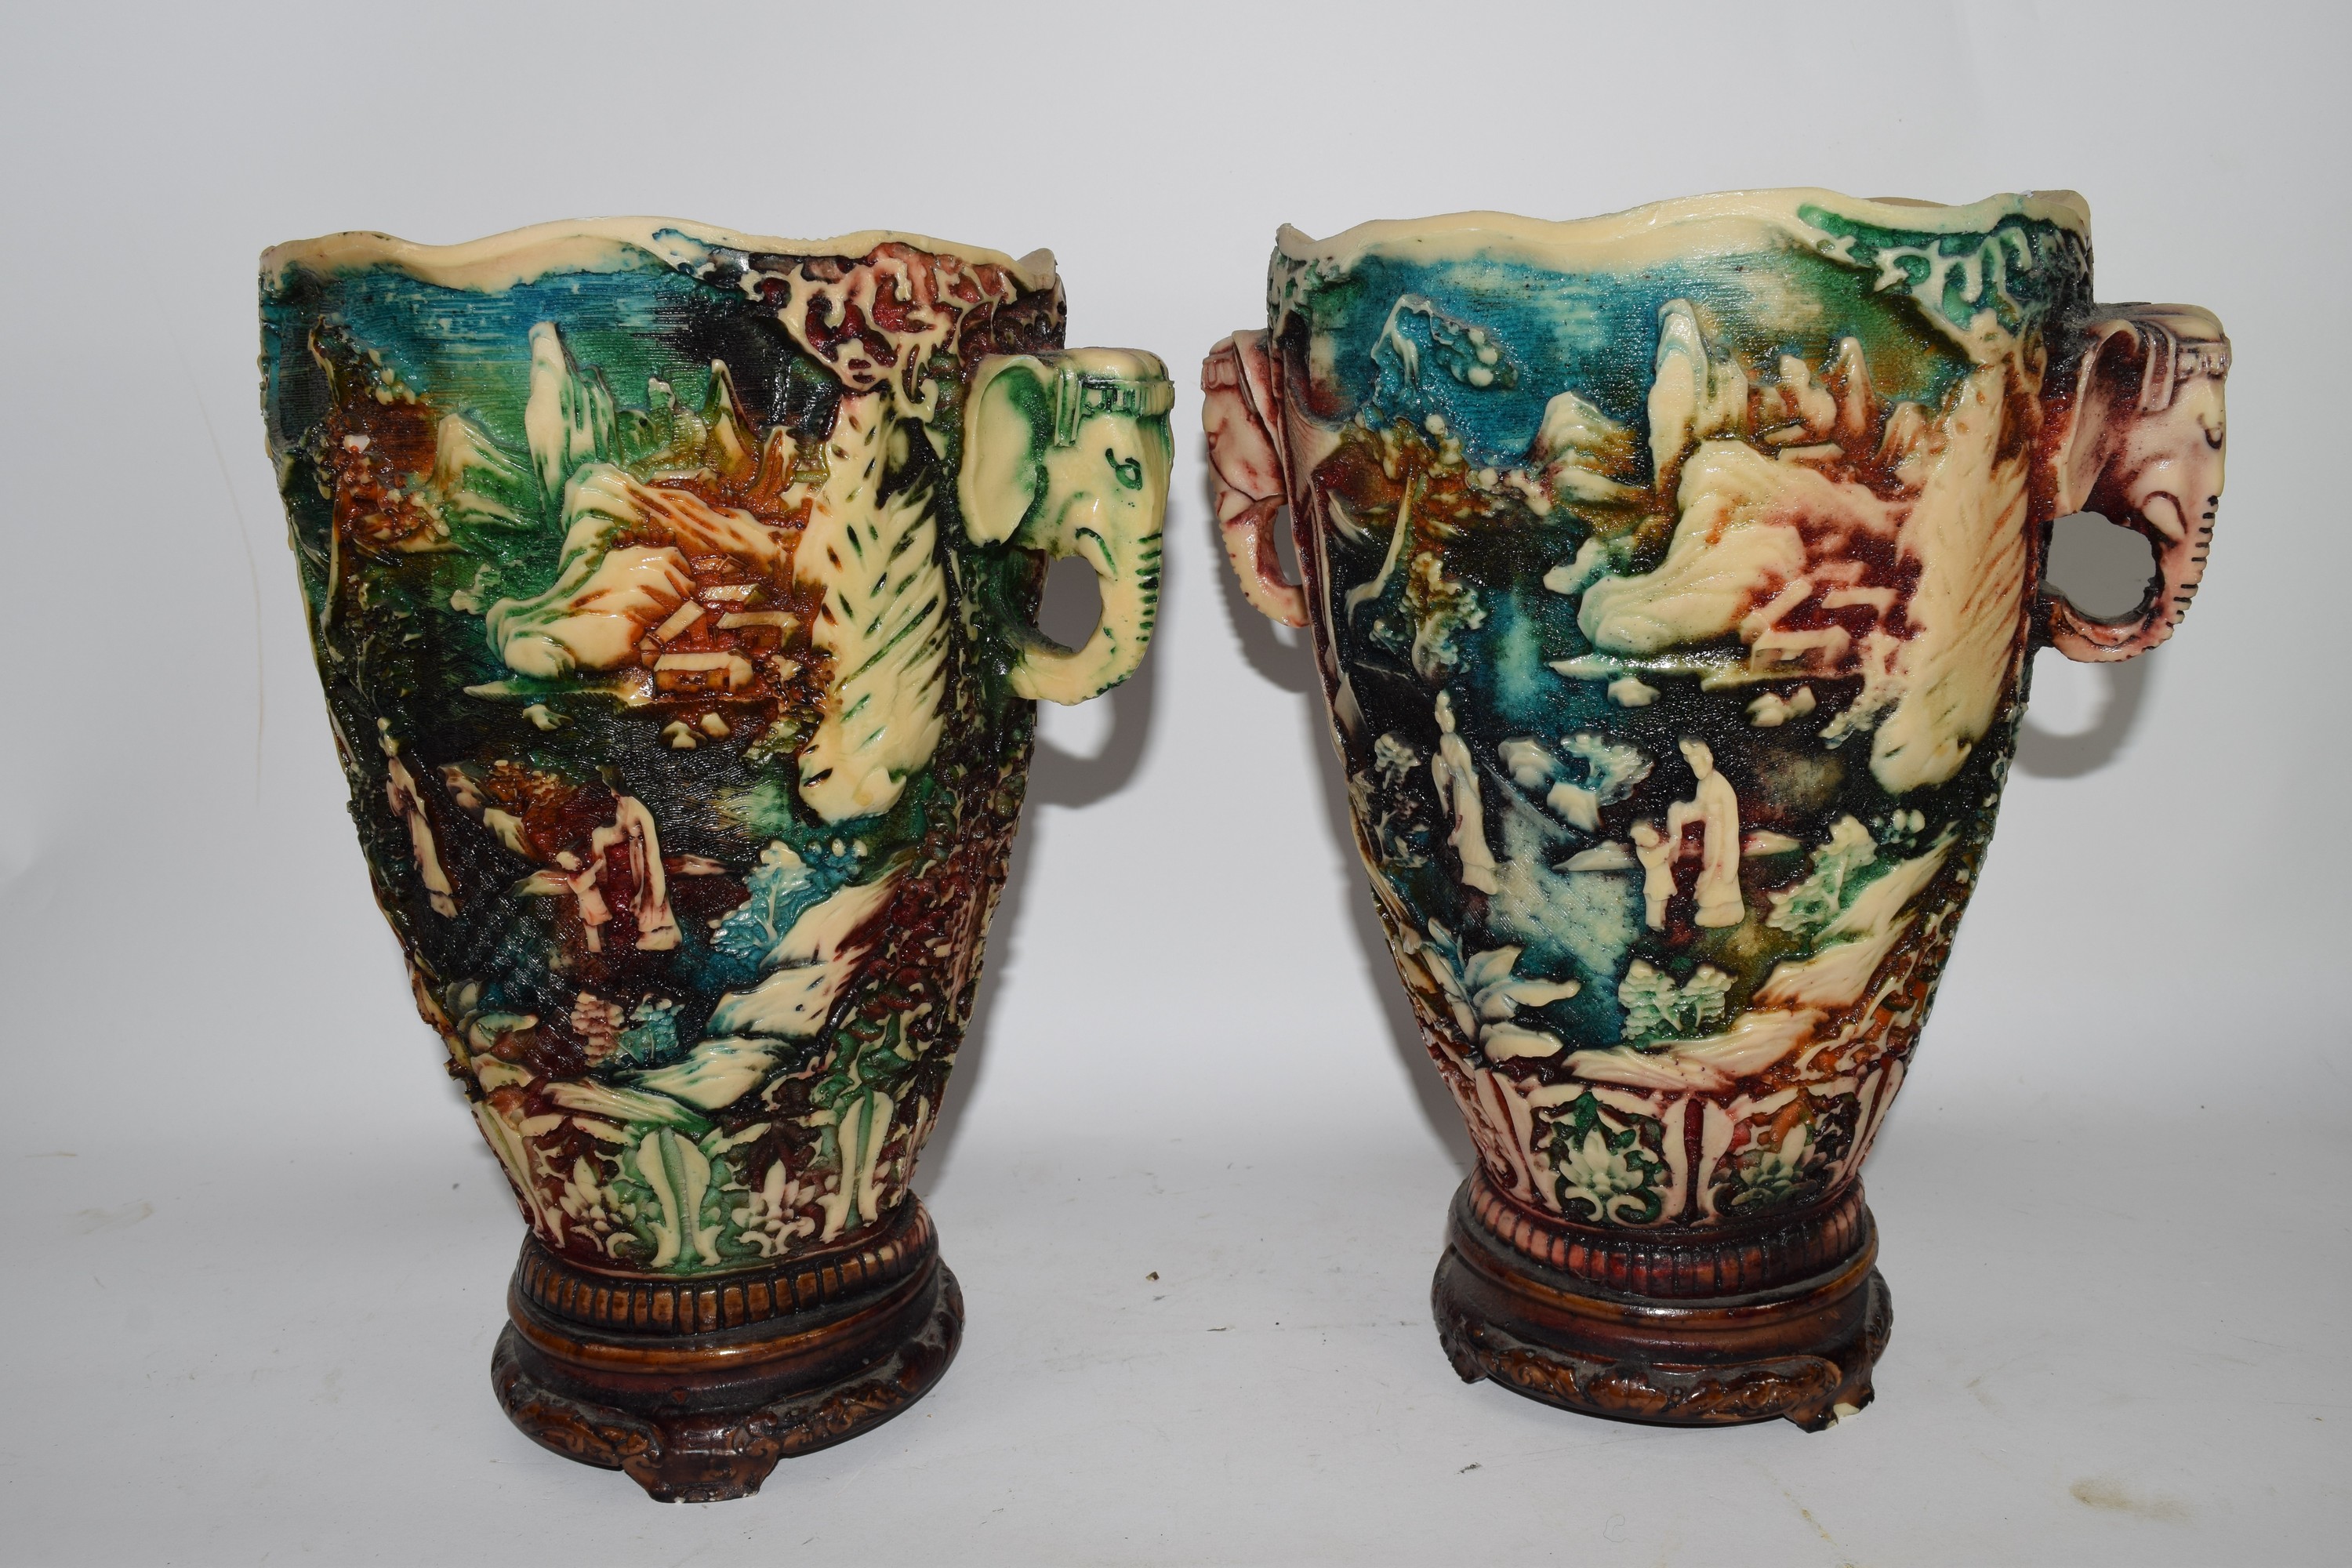 PAIR OF POTTERY VASES WITH ELEPHANT HANDLES